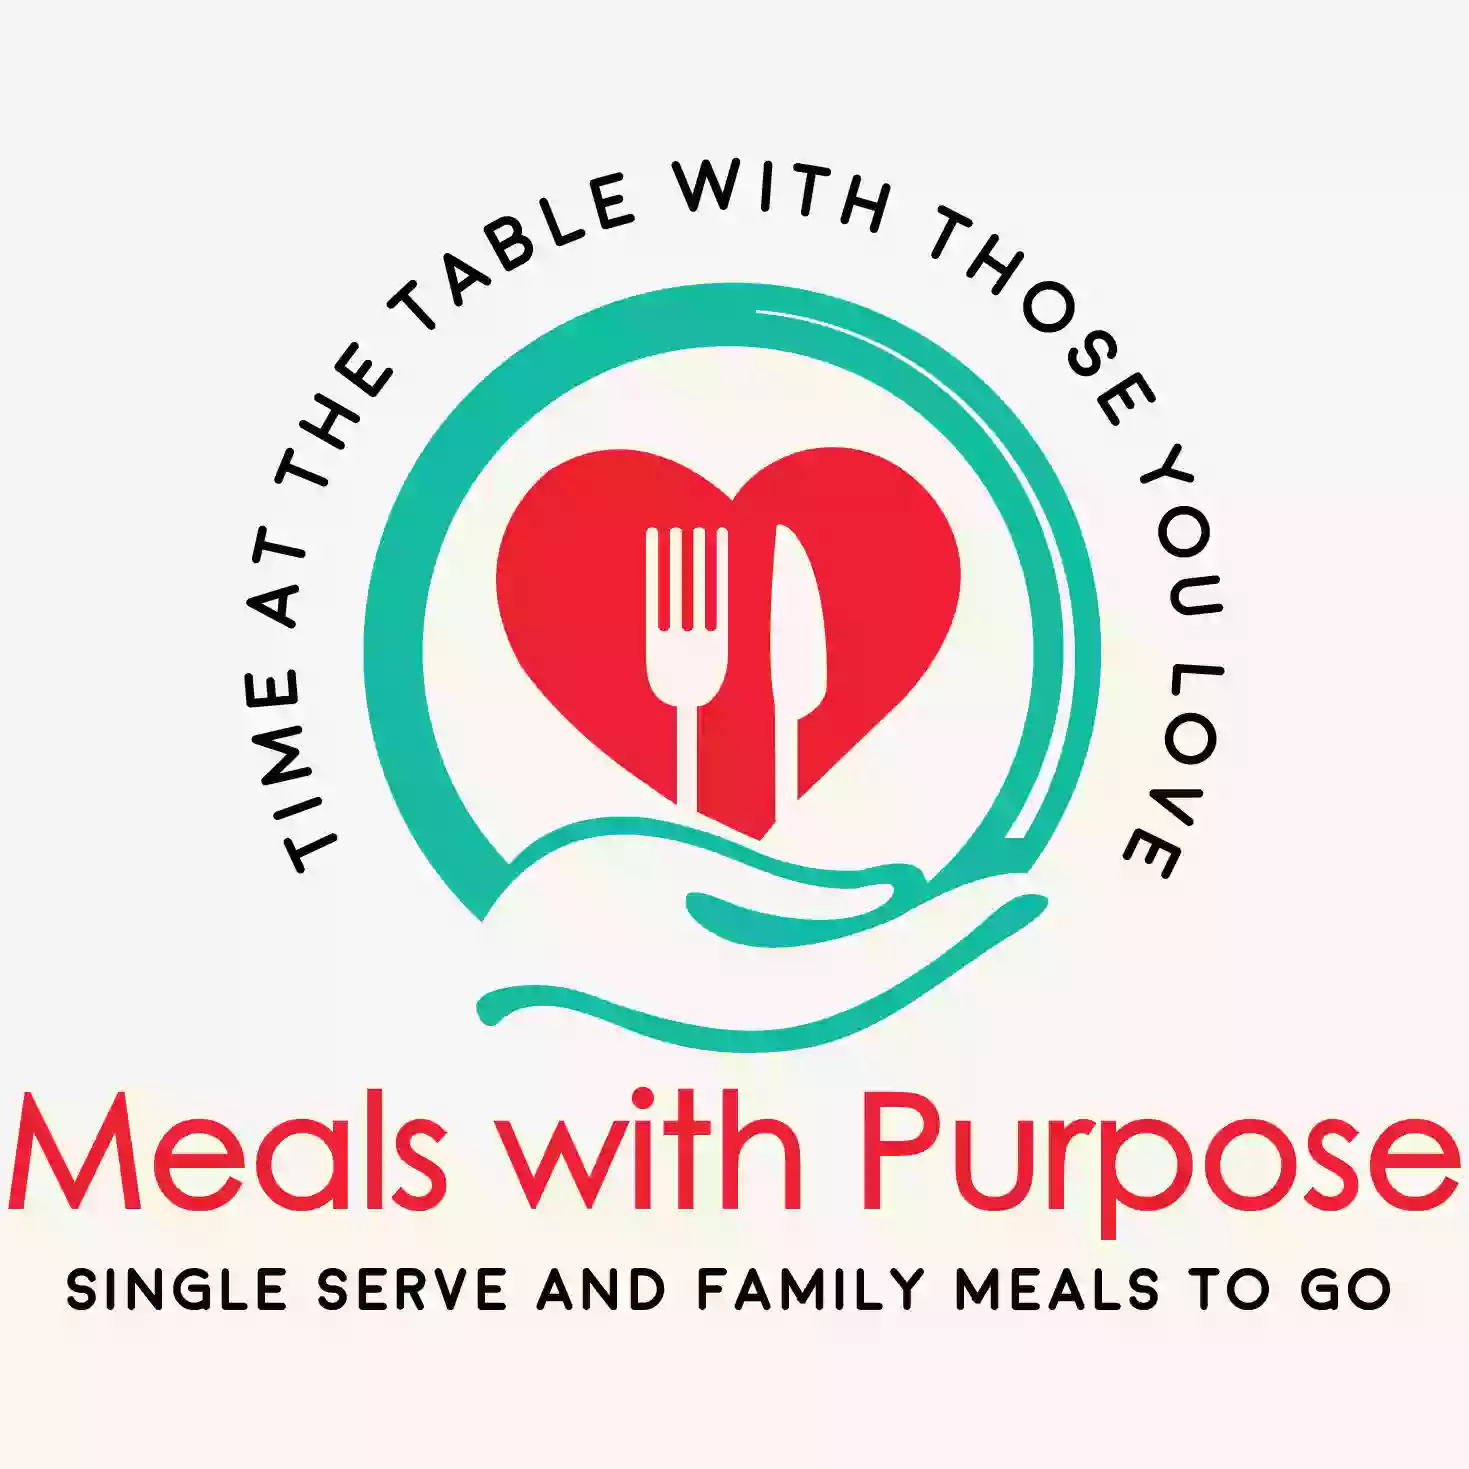 Meals with Purpose